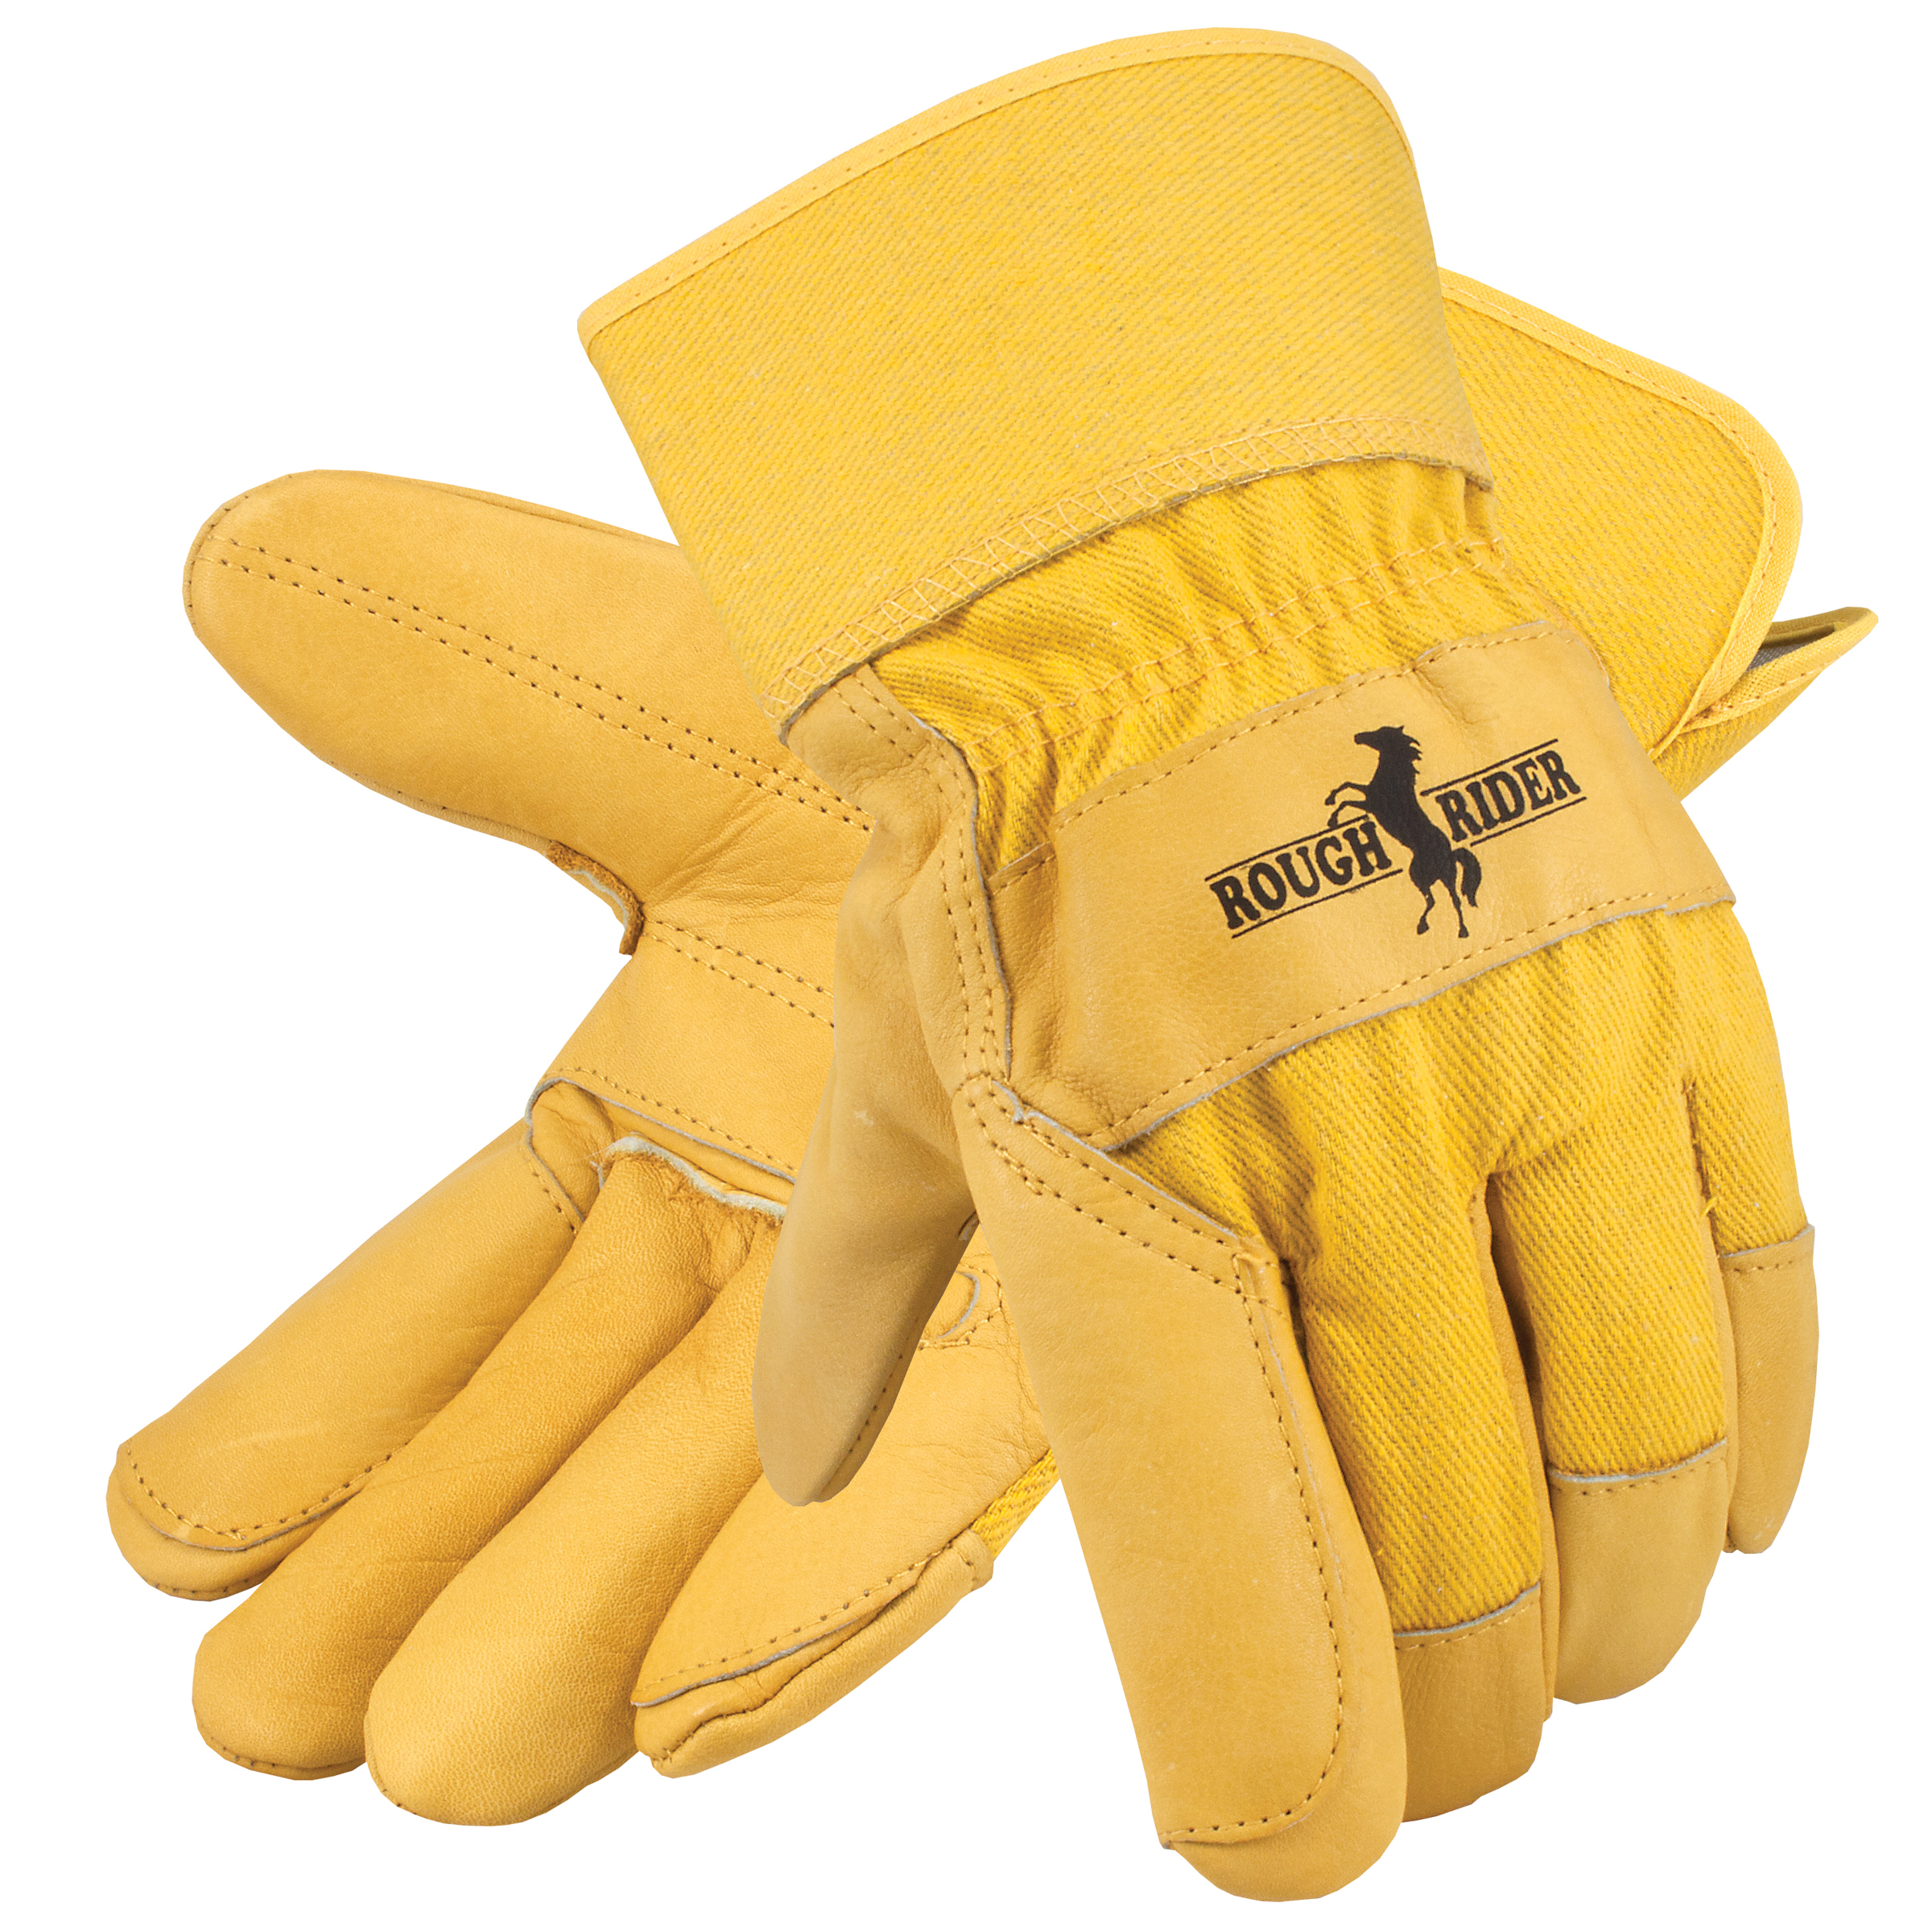 Rough Rider&reg; Grain Leather Double Palm Gloves, Safety Cuff, 1 Pair